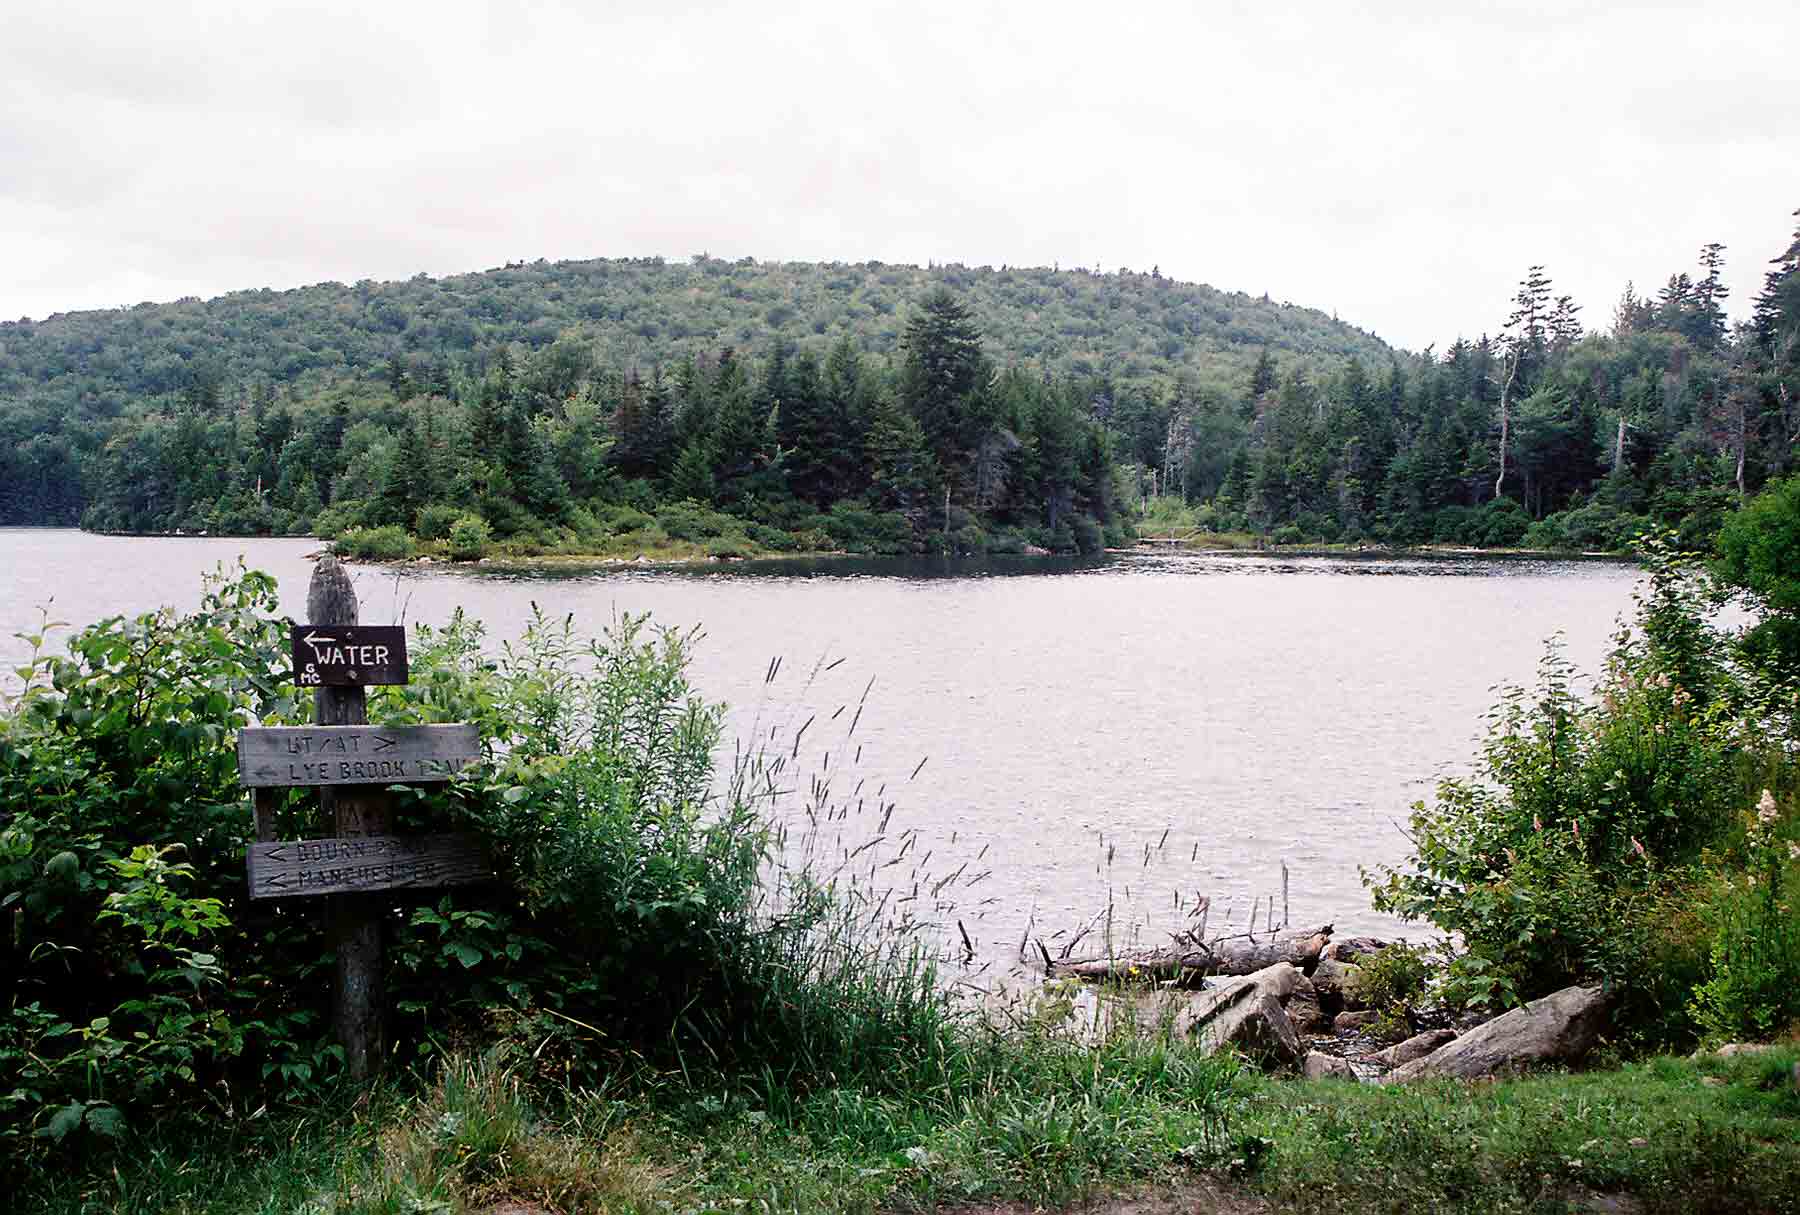 mm 10.5 - View to north shore of Stratton Pond. Courtesy dlcul@conncoll.edu